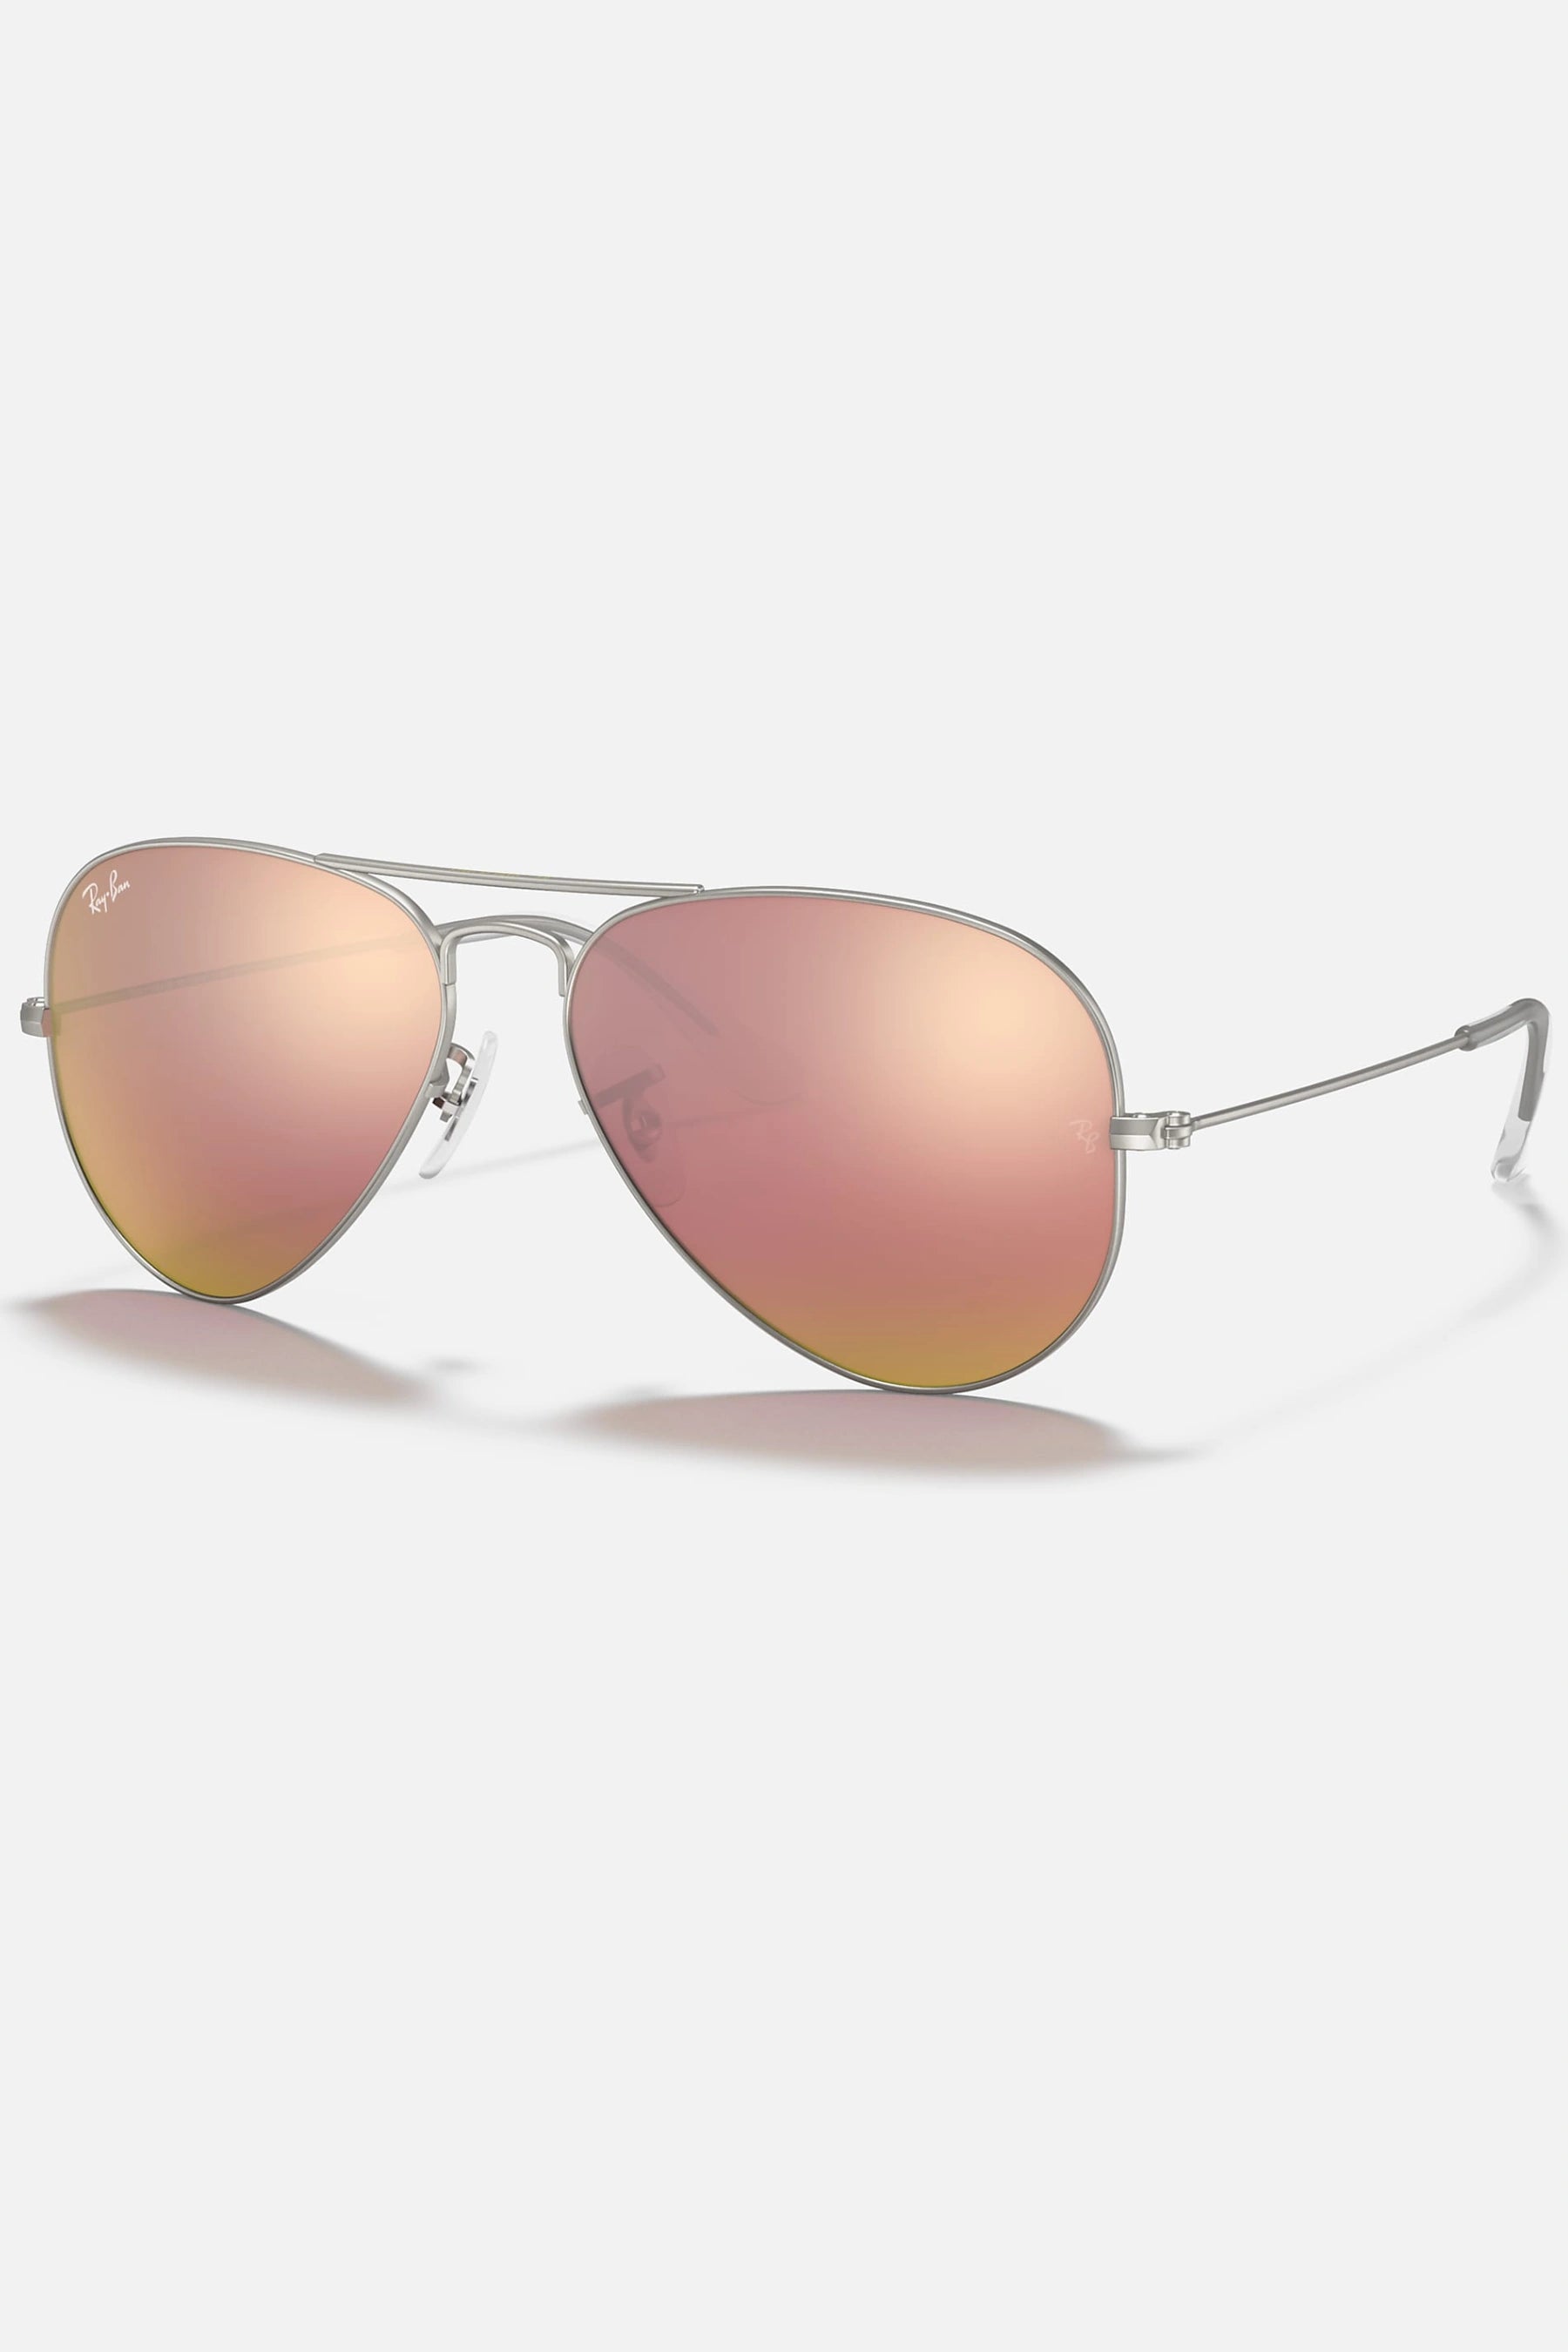 Ray-Ban RB3025 019/Z2 58-14